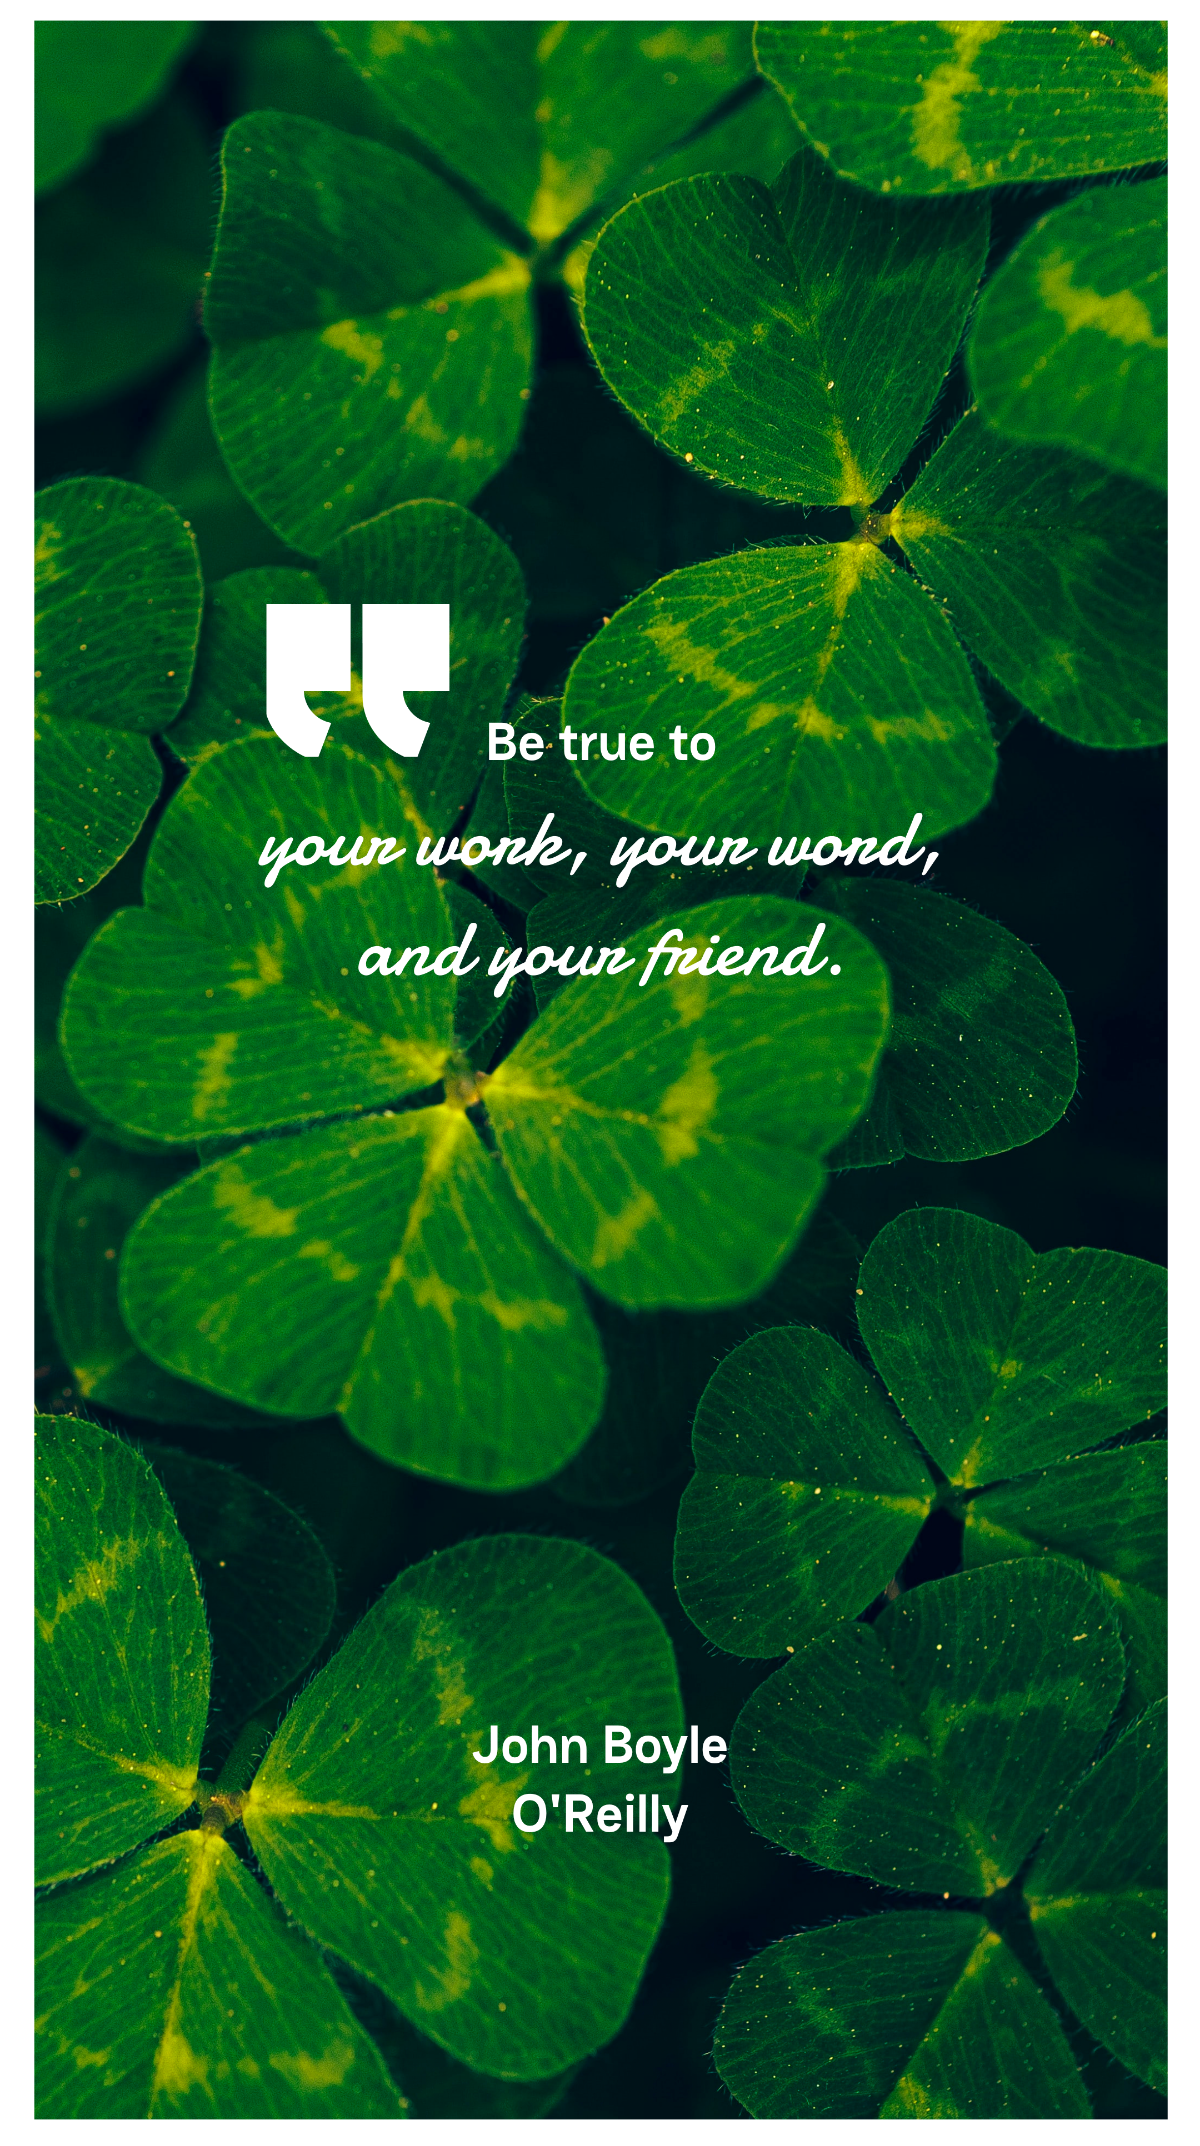 John Boyle O'Reilly - Be true to your work, your word, and your friend. Template